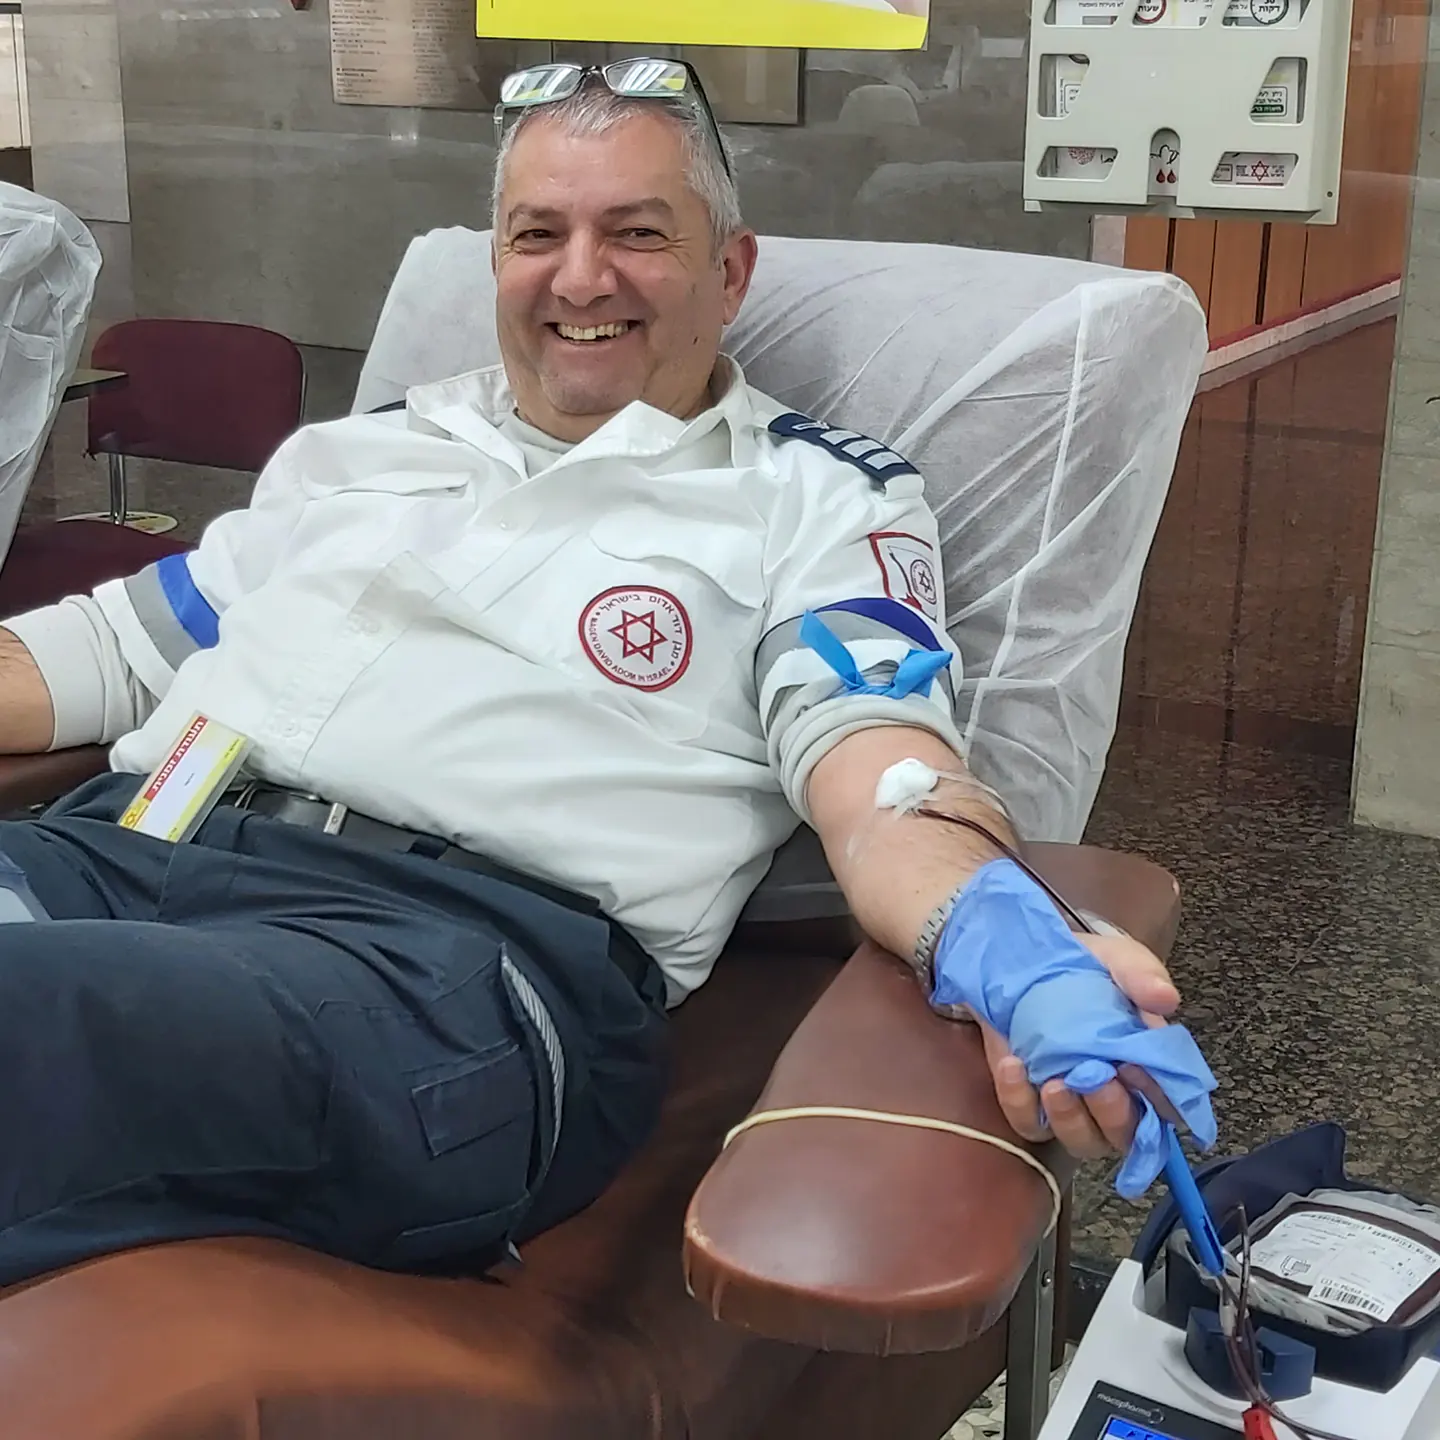 Rami Makhlouf, an MDA employee, donated blood at the 24 Medical Center on 01/2023/XNUMX